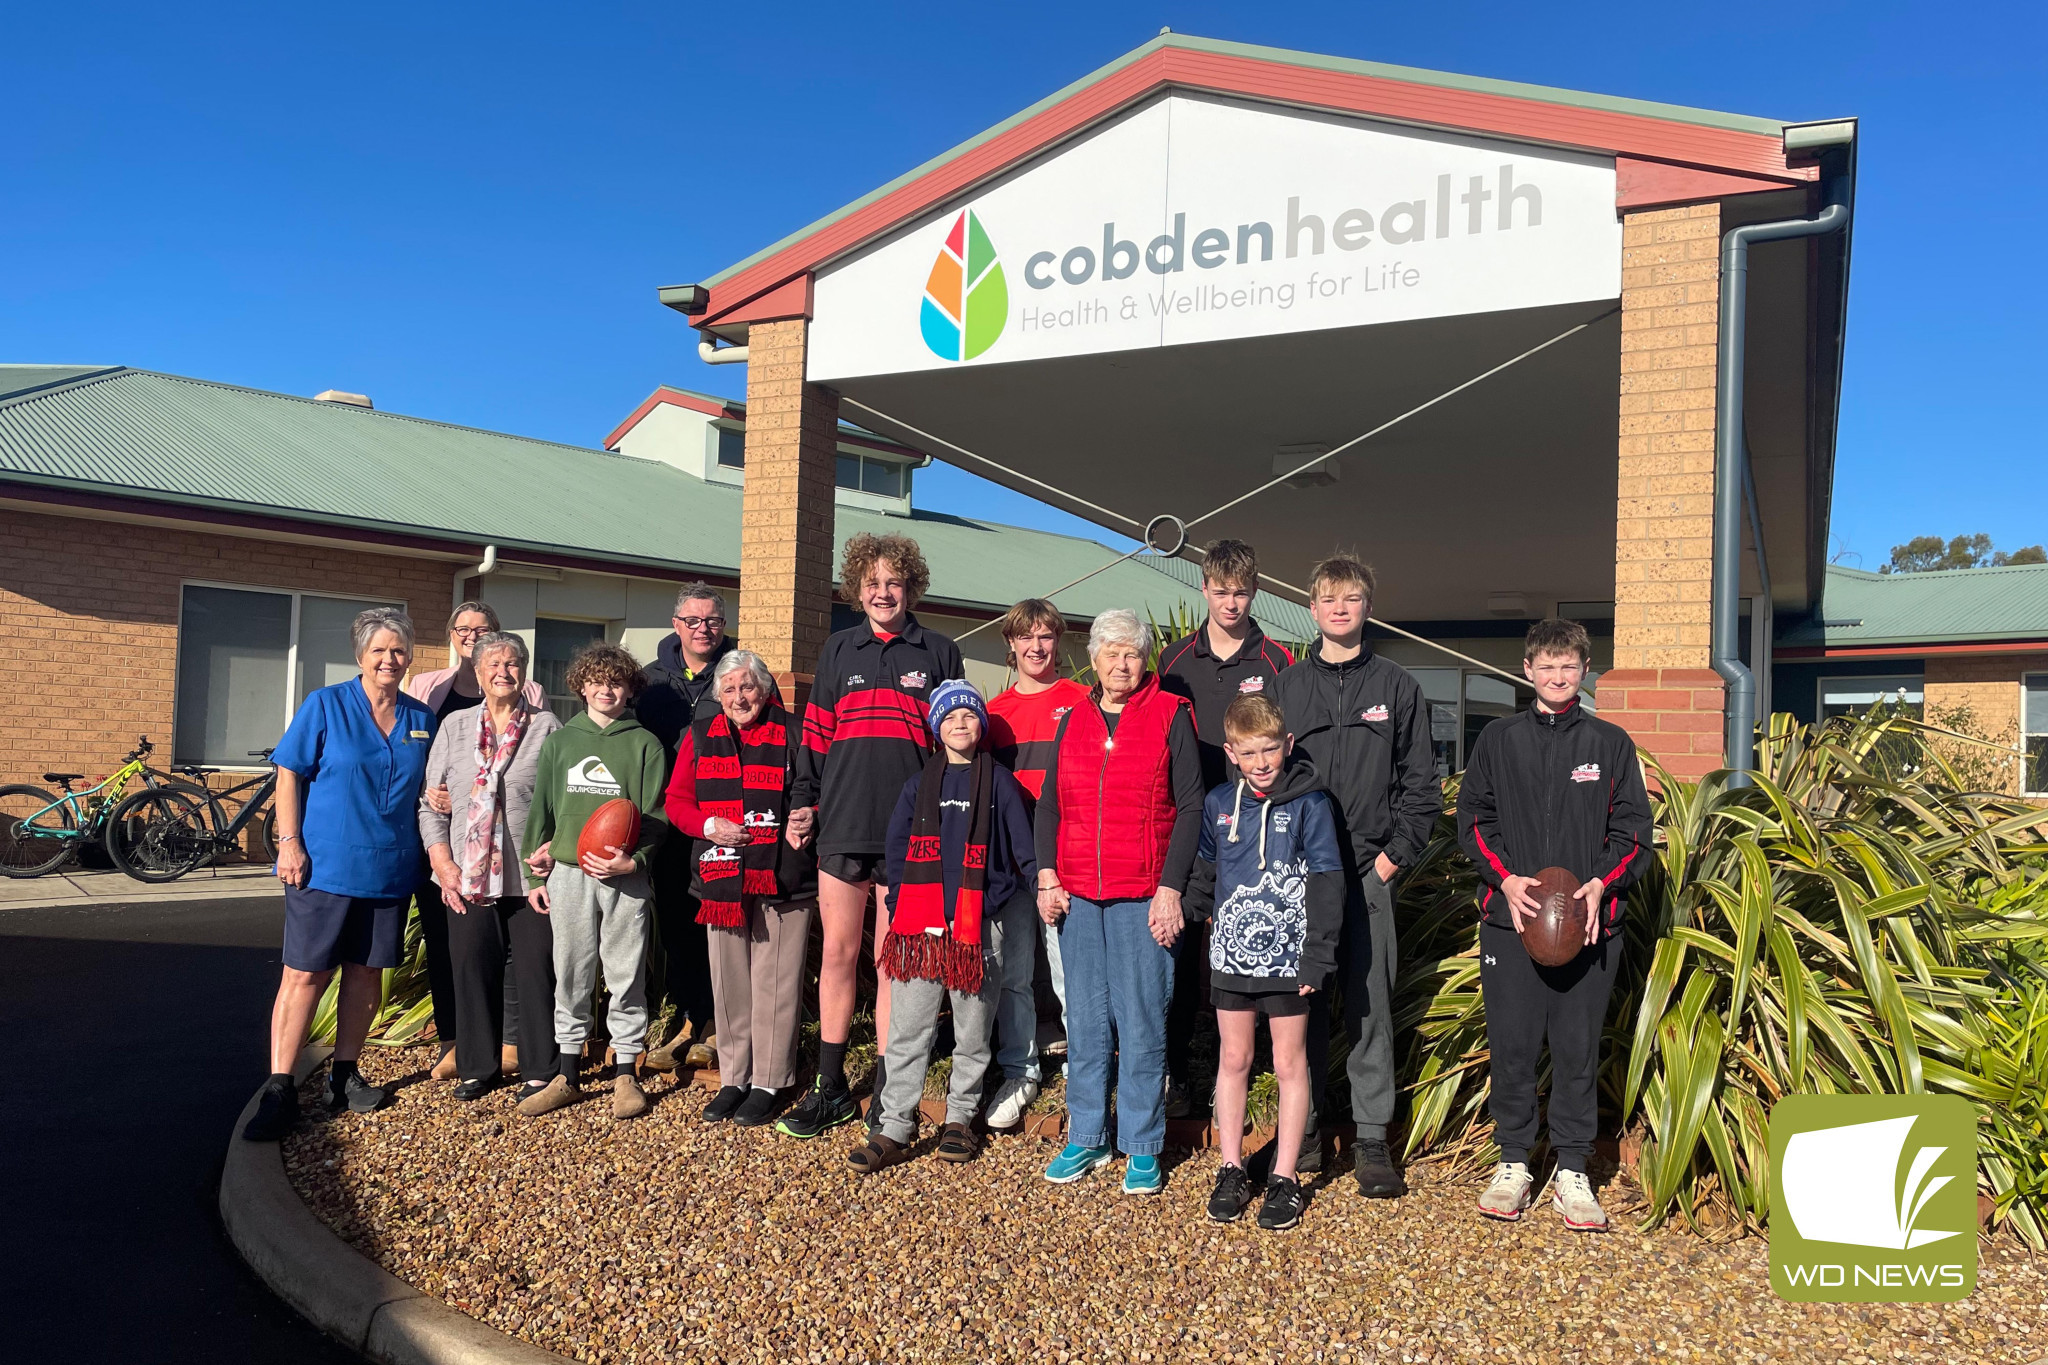 Support appreciated: Cobden Junior Football Netball Club donated more than $900 to Cobdenhealth thanks to a raffle held over the weekend.